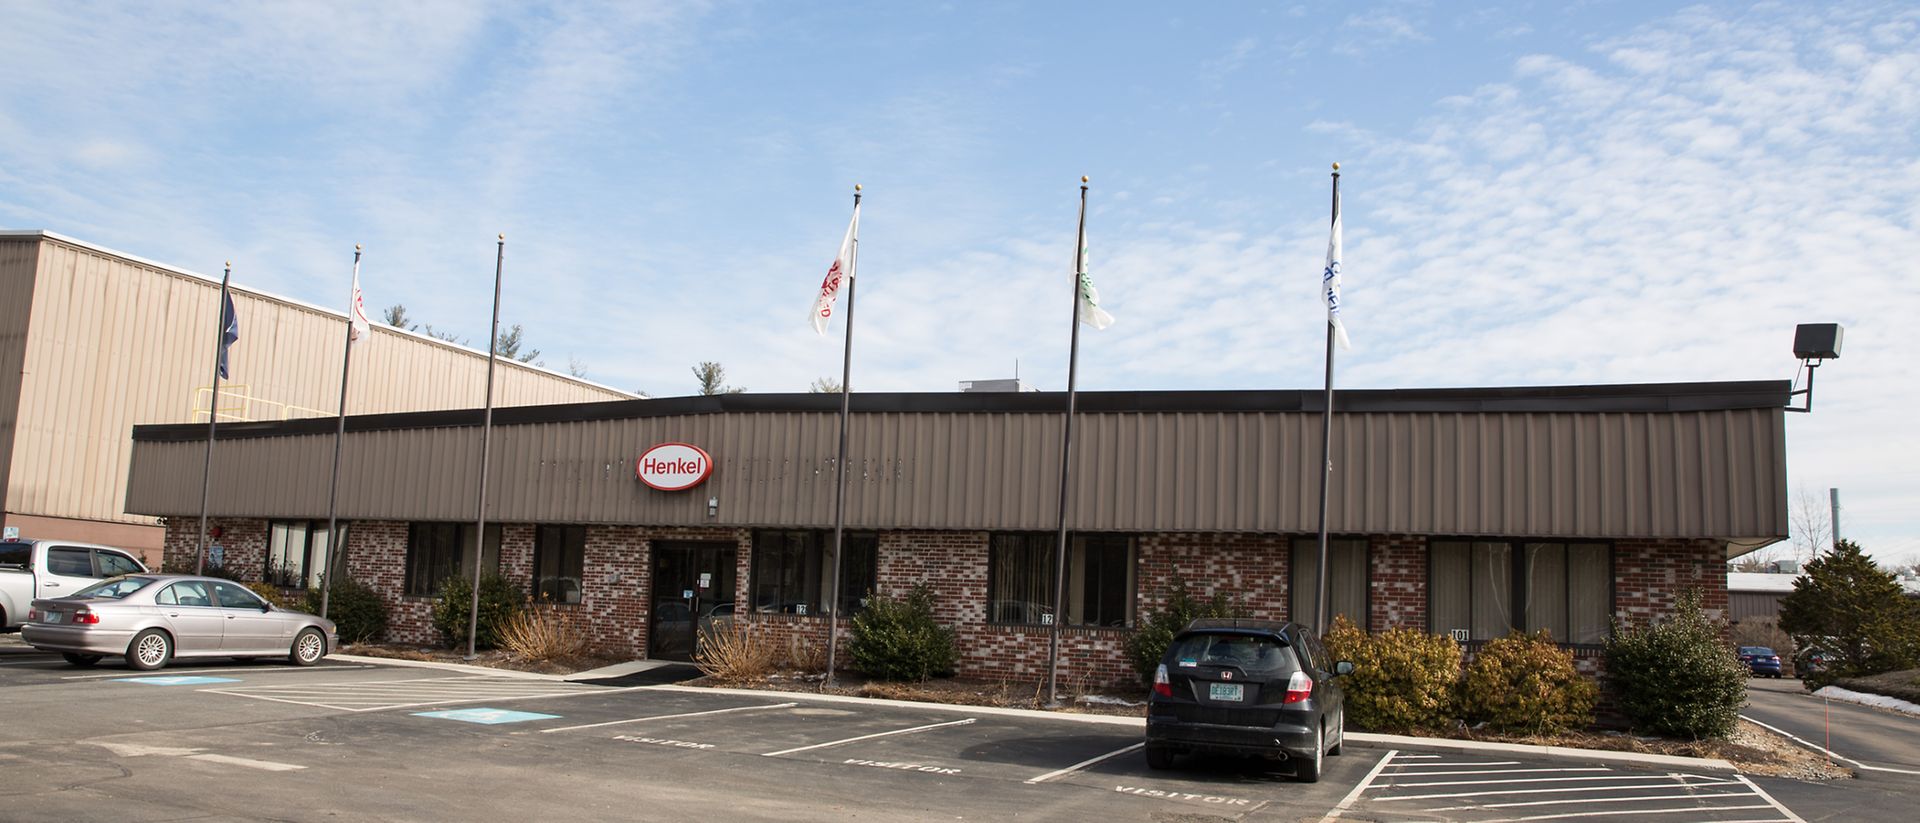 The Seabrook facility supports all five of Henkel’s Adhesive Technologies’ business units